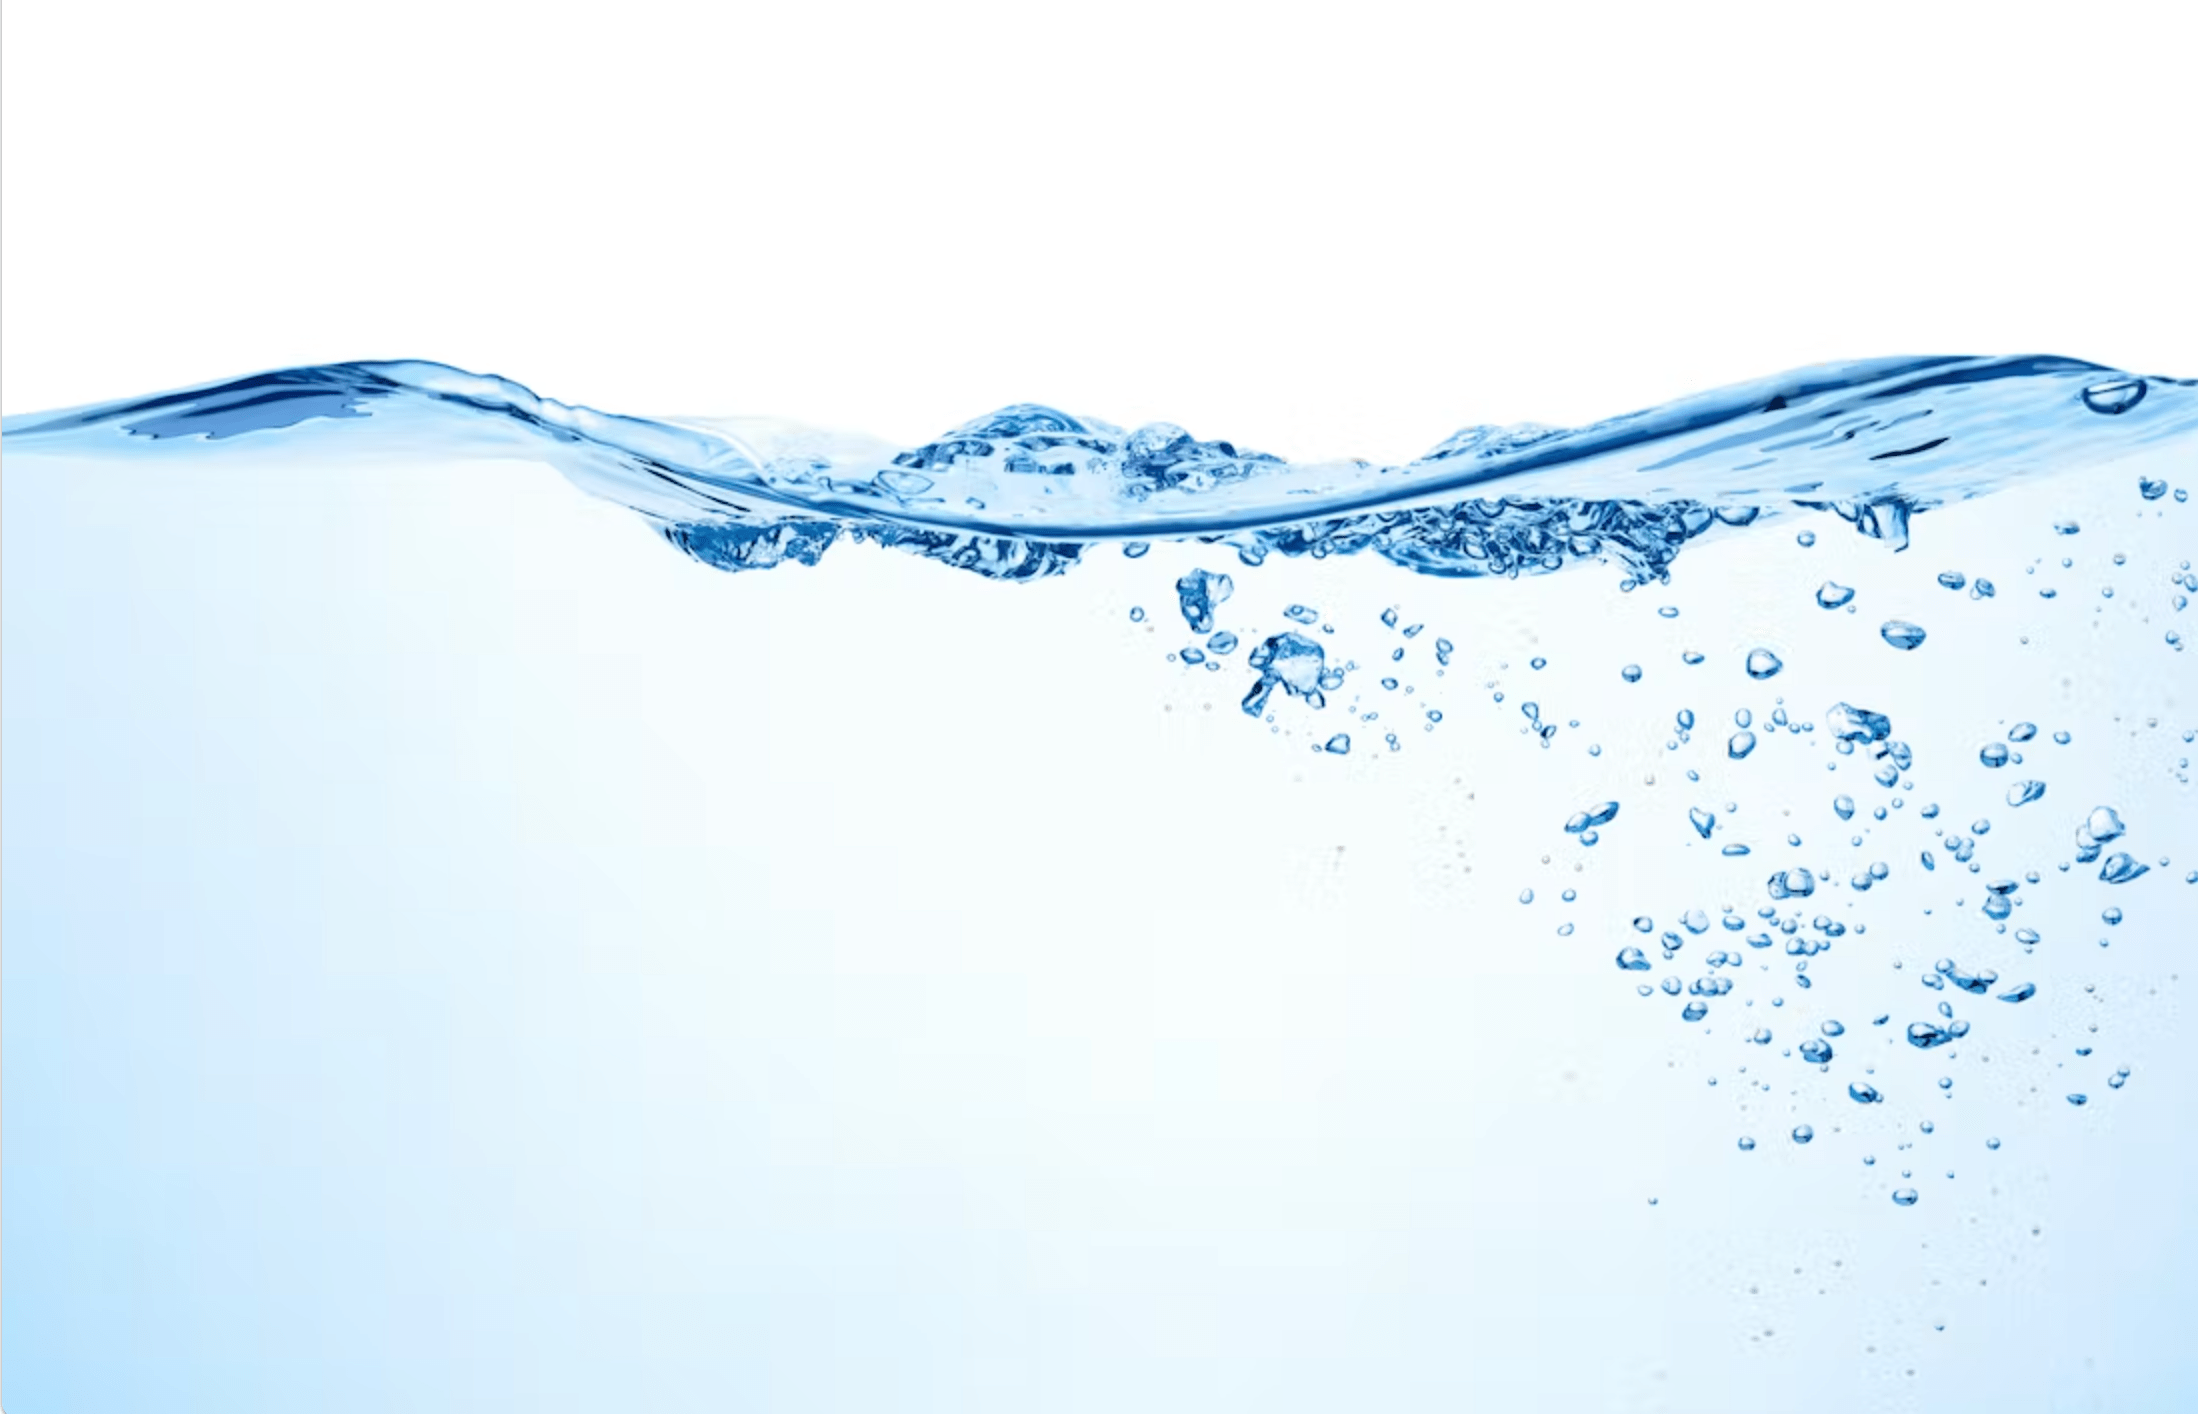 Milestone contract for graphene technology in water treatment